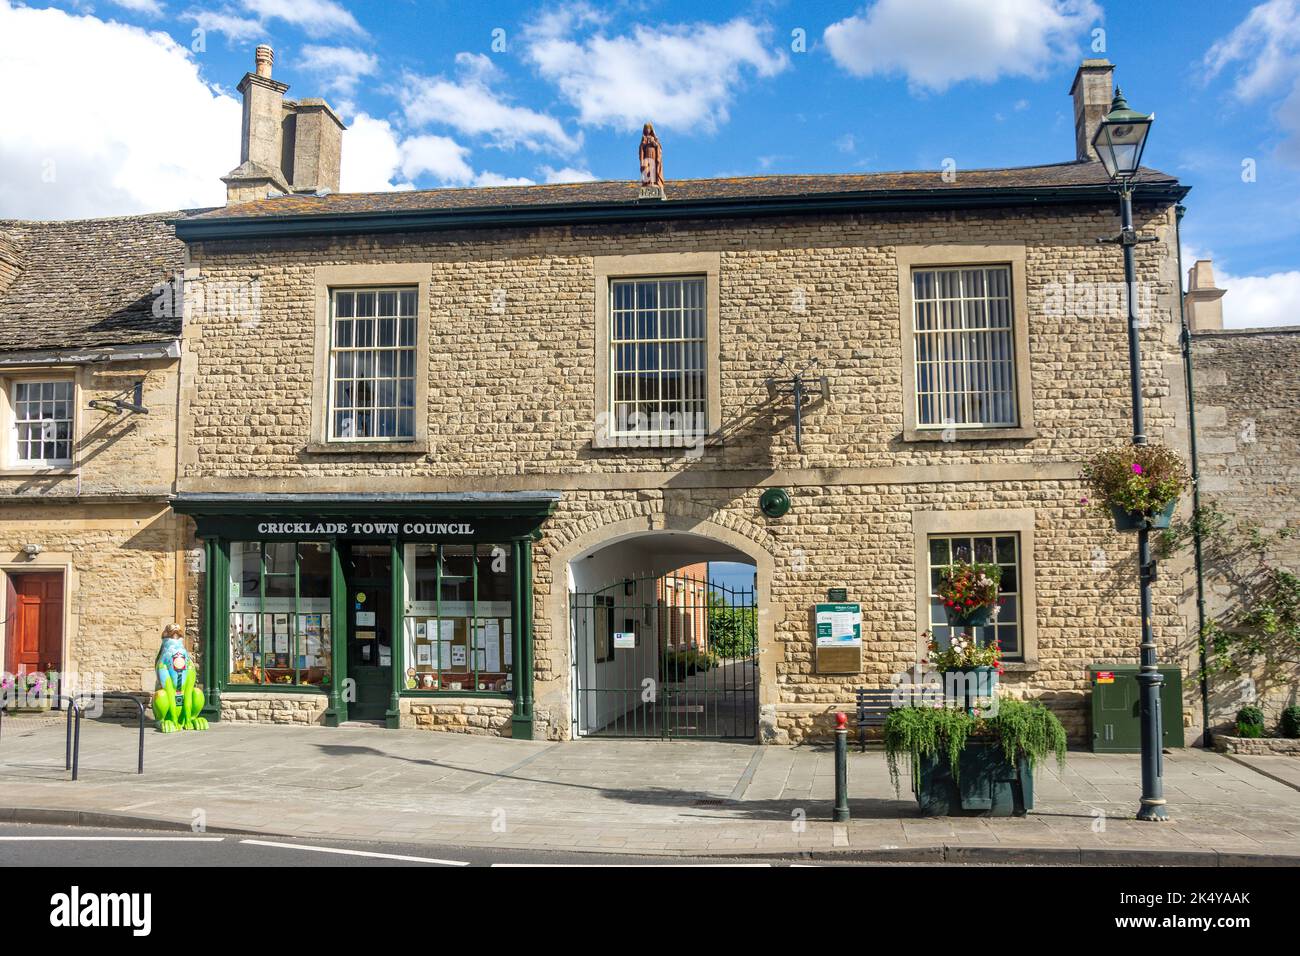 Cricklade Town Council, High Street, Cricklade, Wiltshire, England, United Kingdom Stock Photo